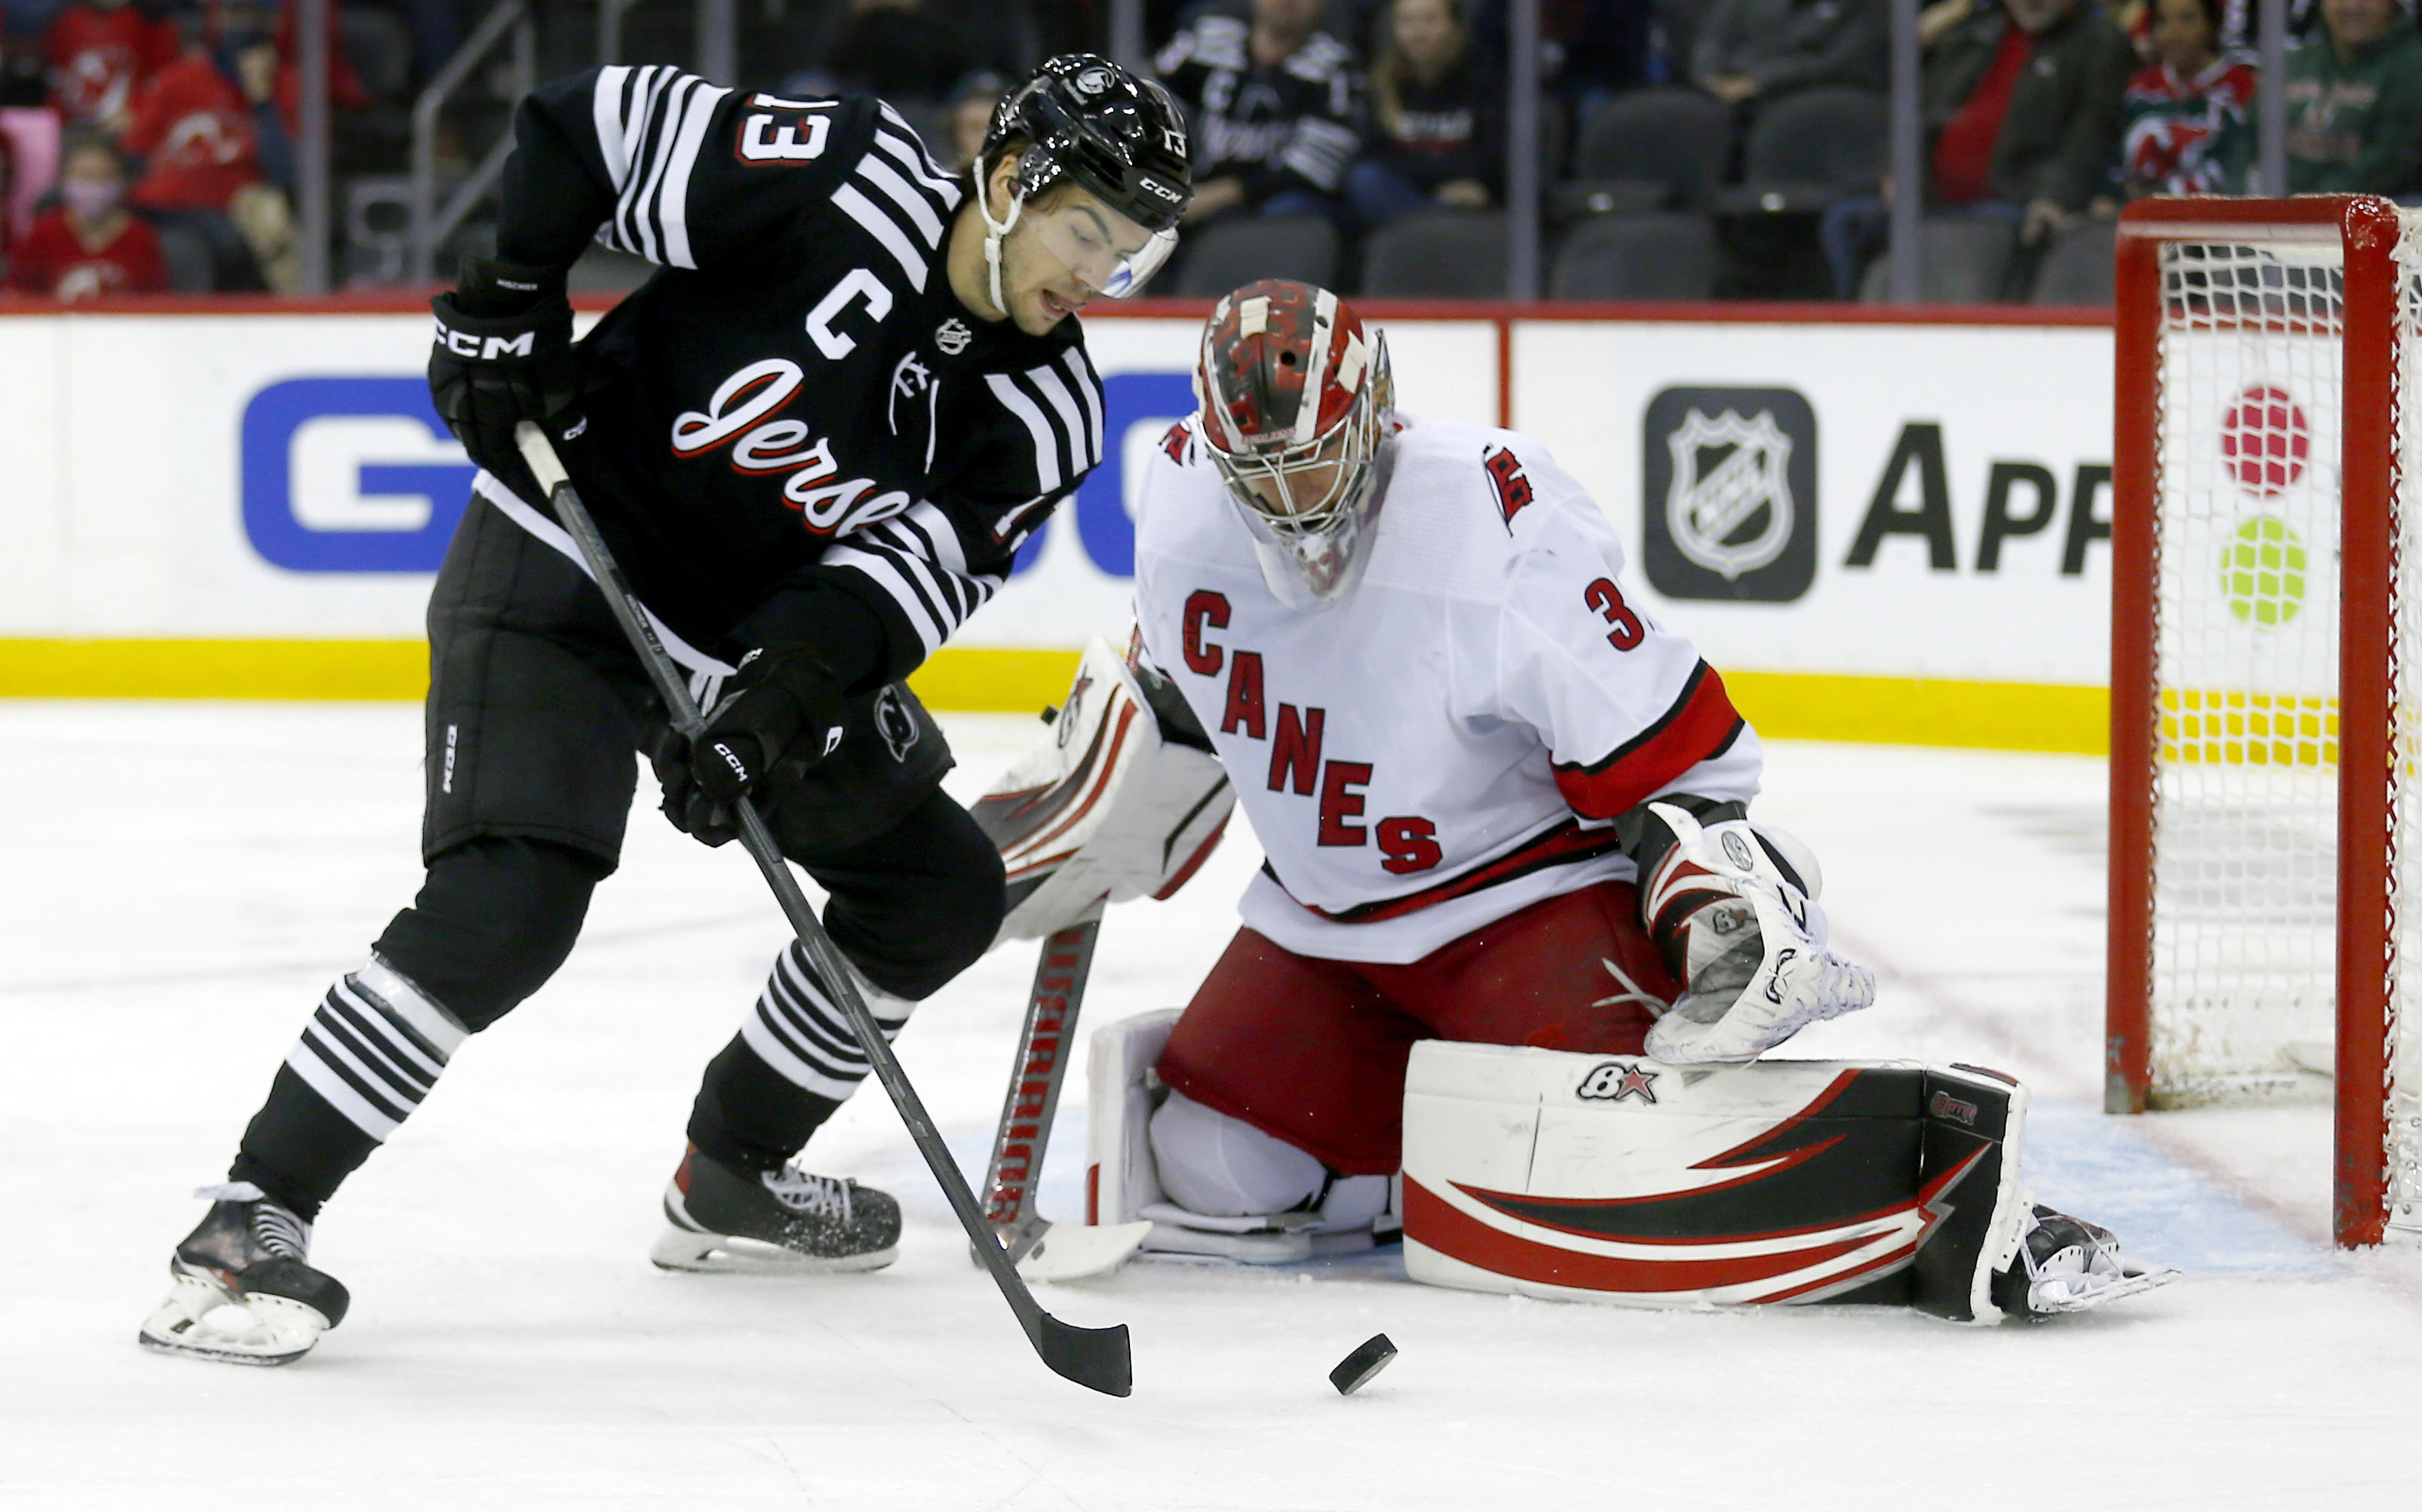 Devils vs. Rangers Game 4 live stream: TV channel, how to watch